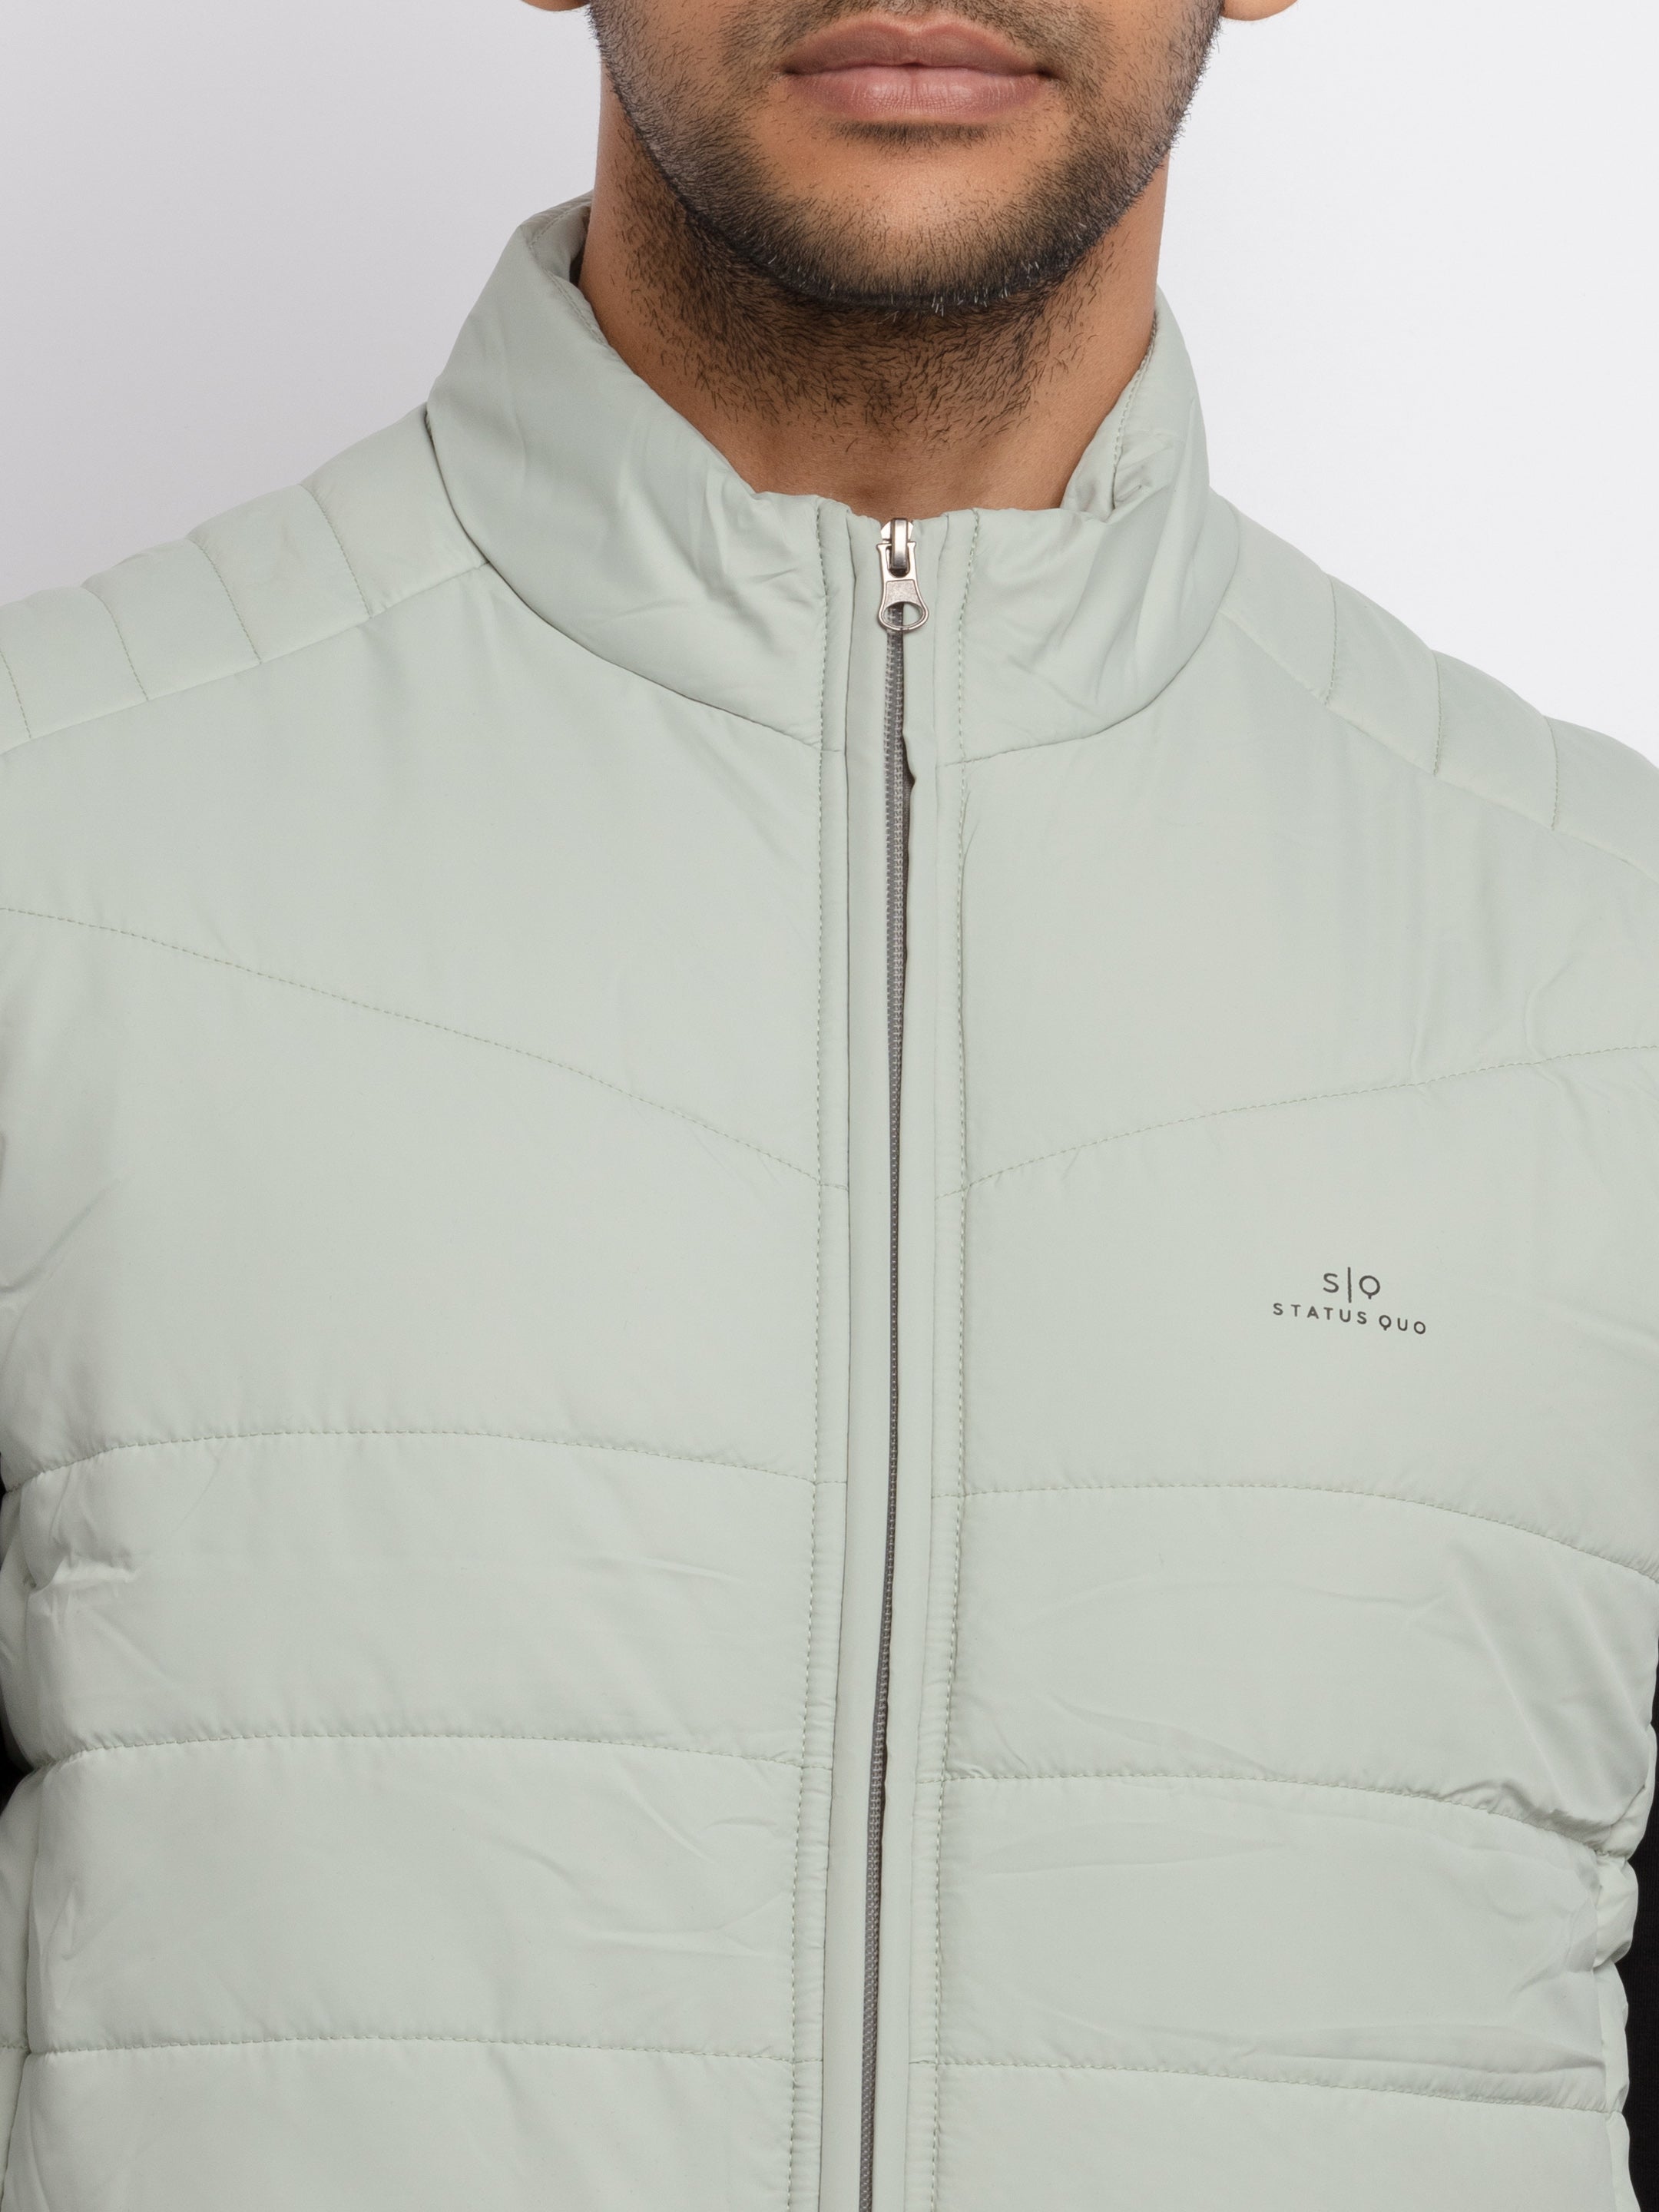 Used Under Armour ColdGear Quilted Half-Zip Top | REI Co-op